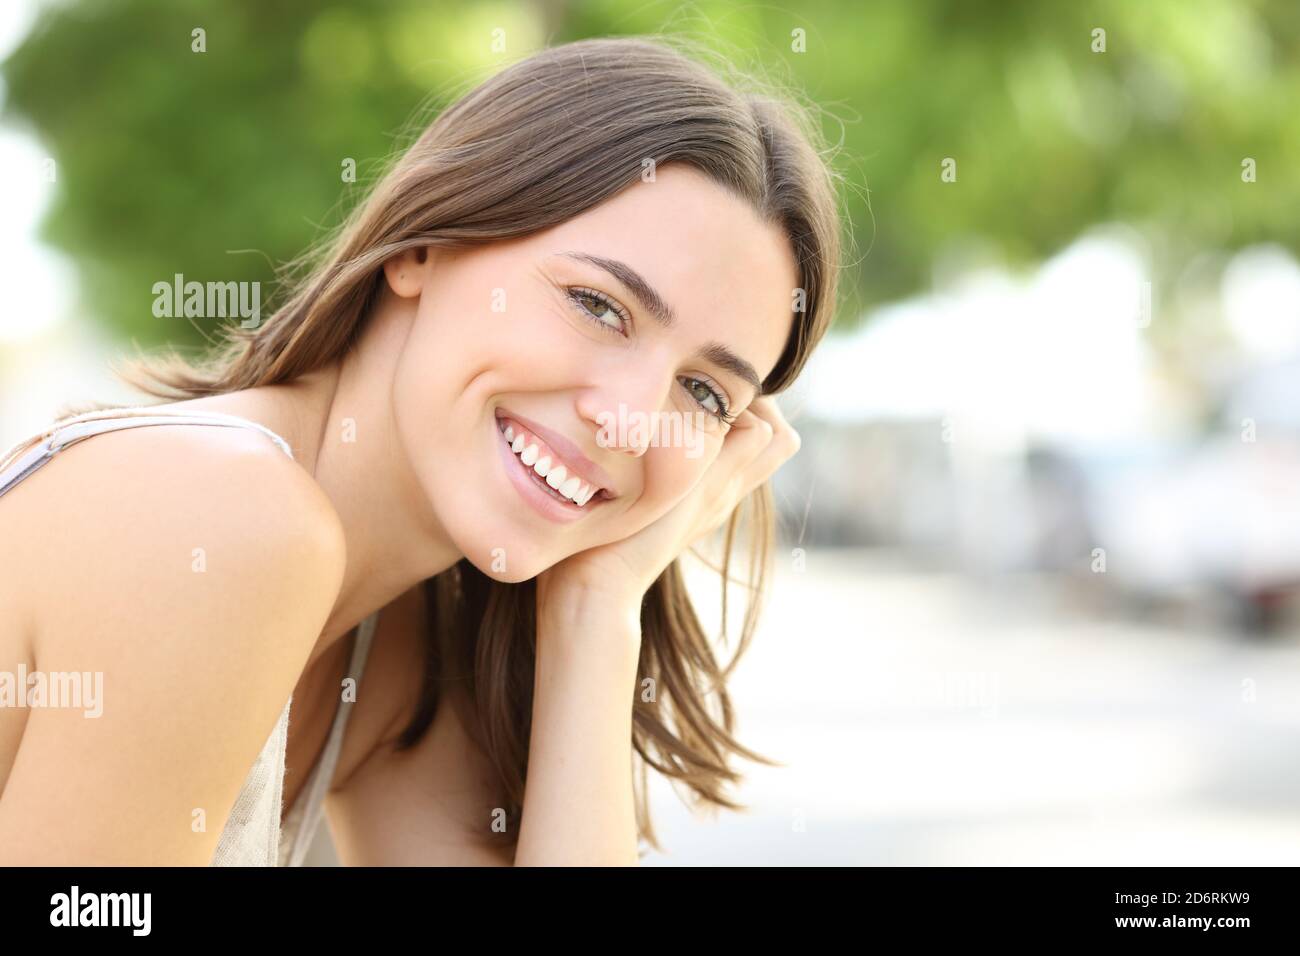 Happy woman with perfect smile looks at camera in the street Stock Photo